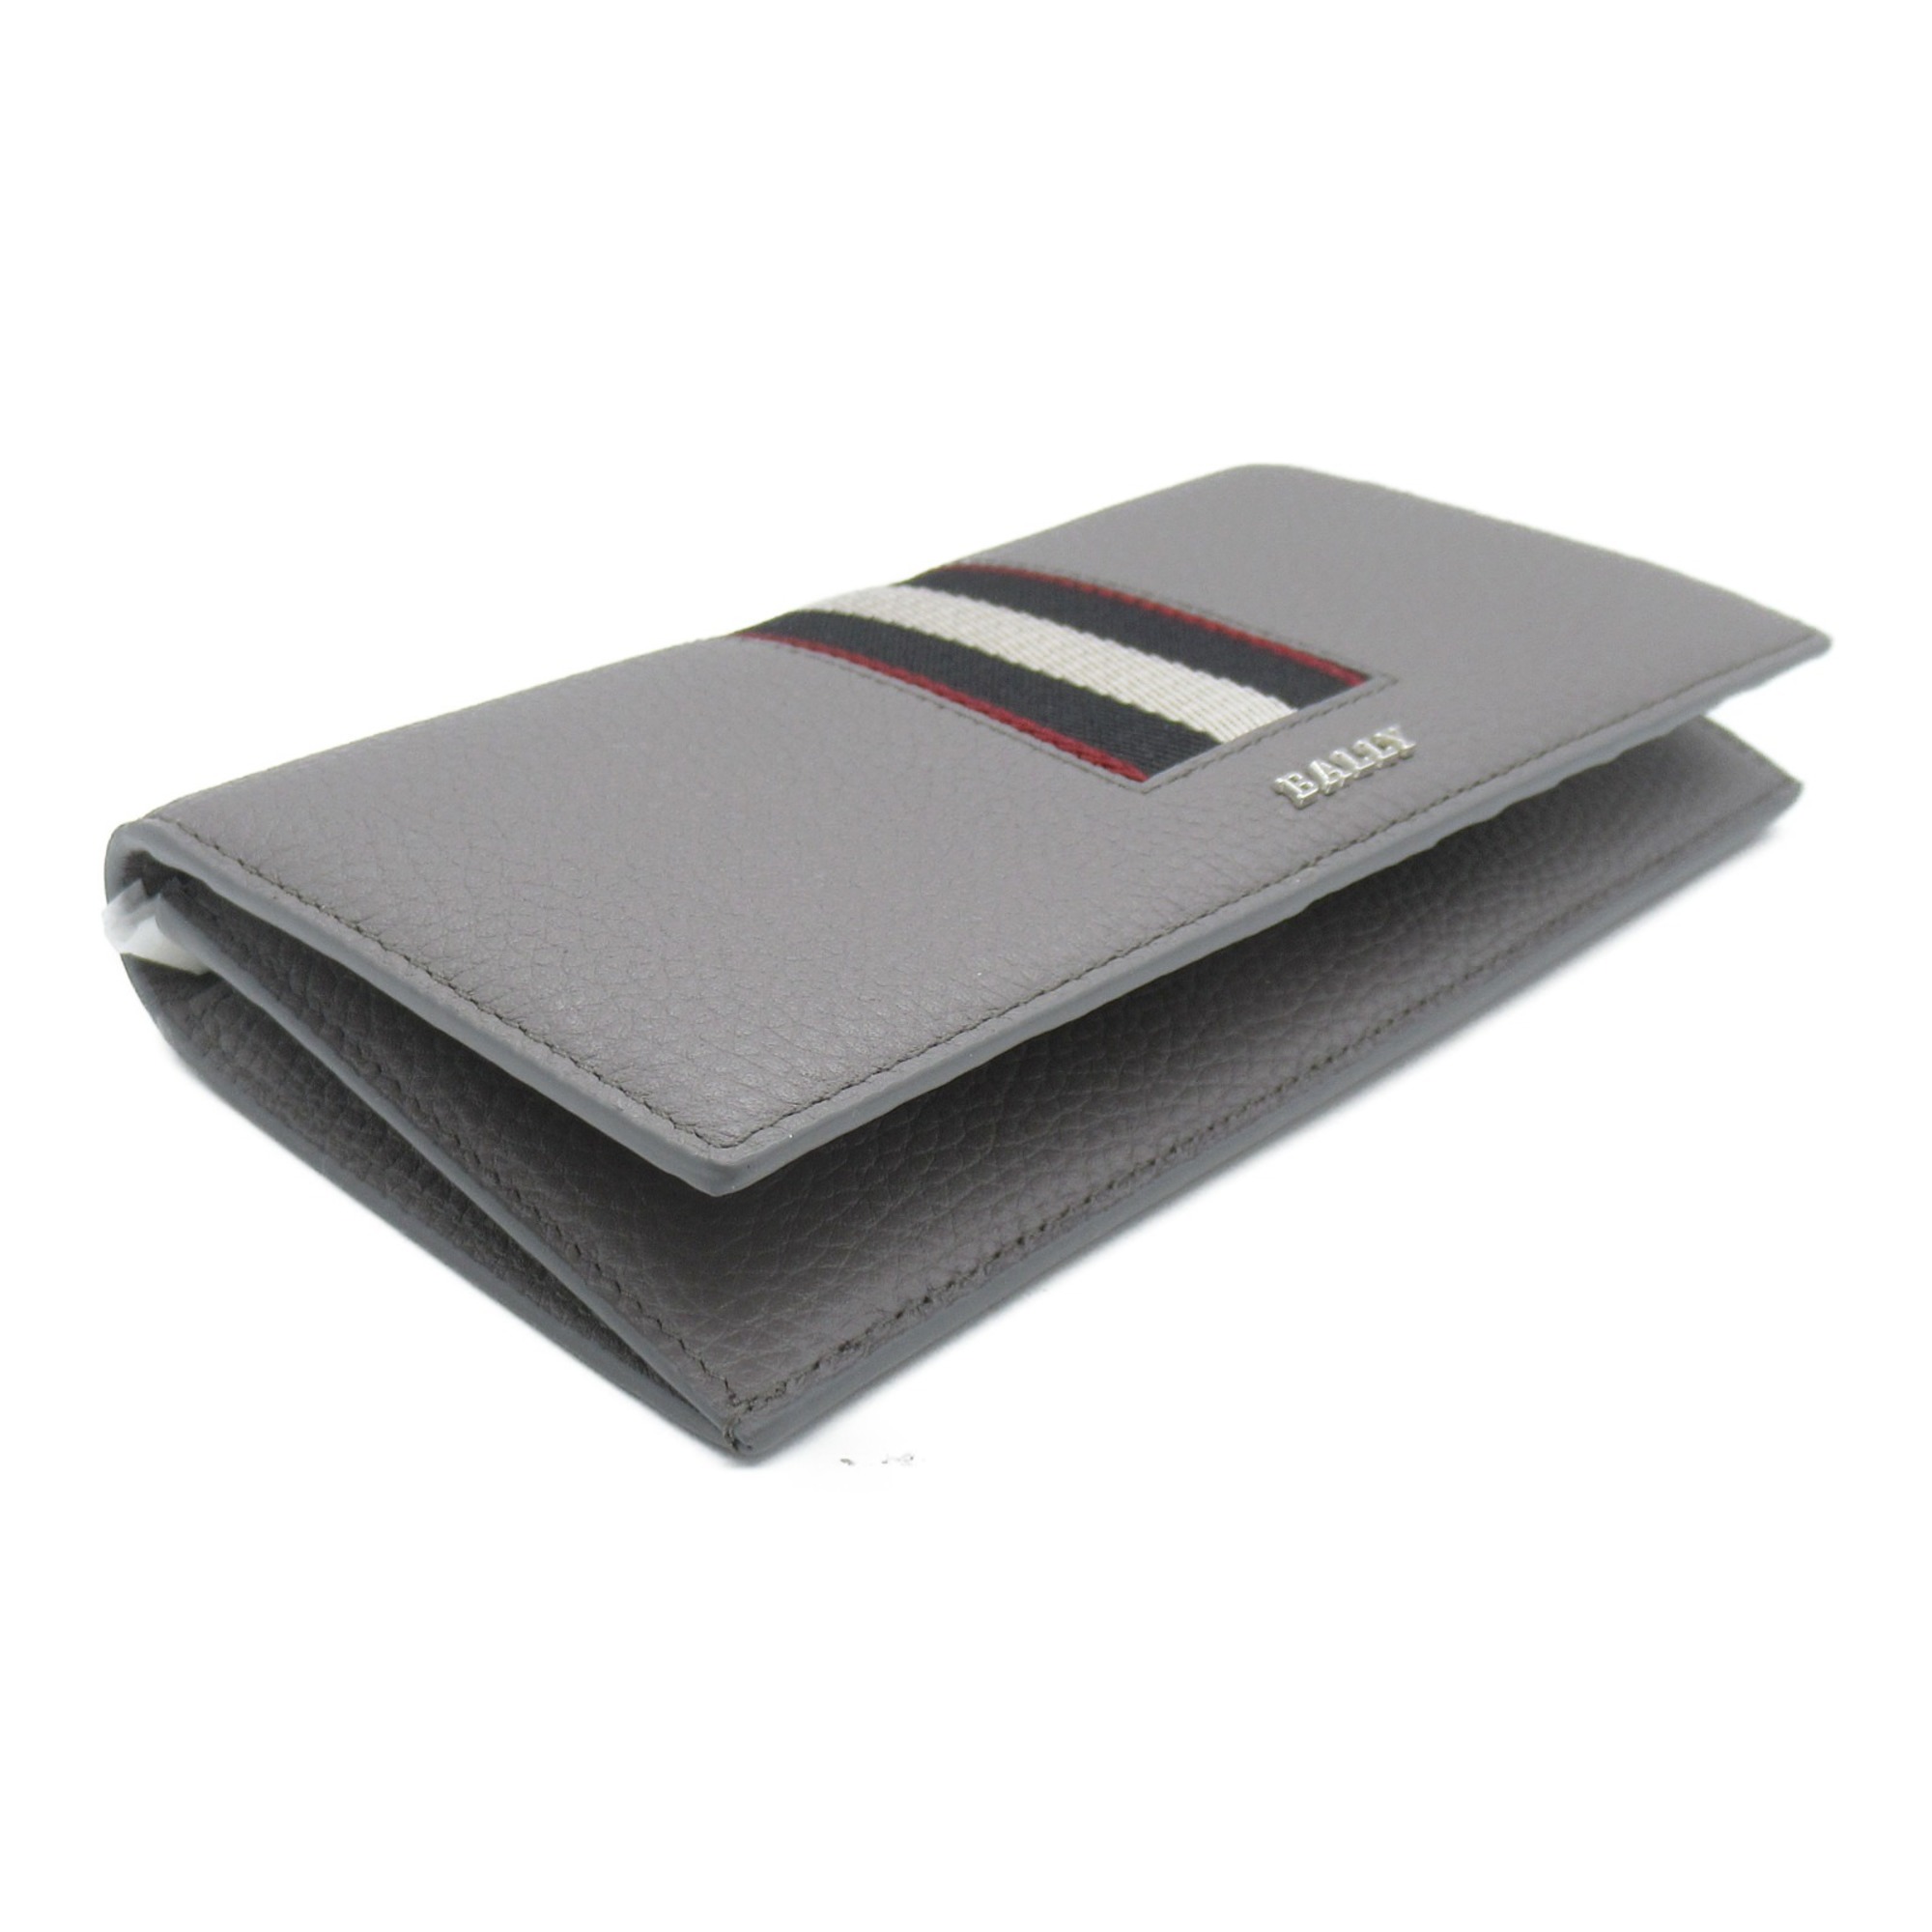 BALLY Bifold long wallet Gray dark mineral leather 6306282